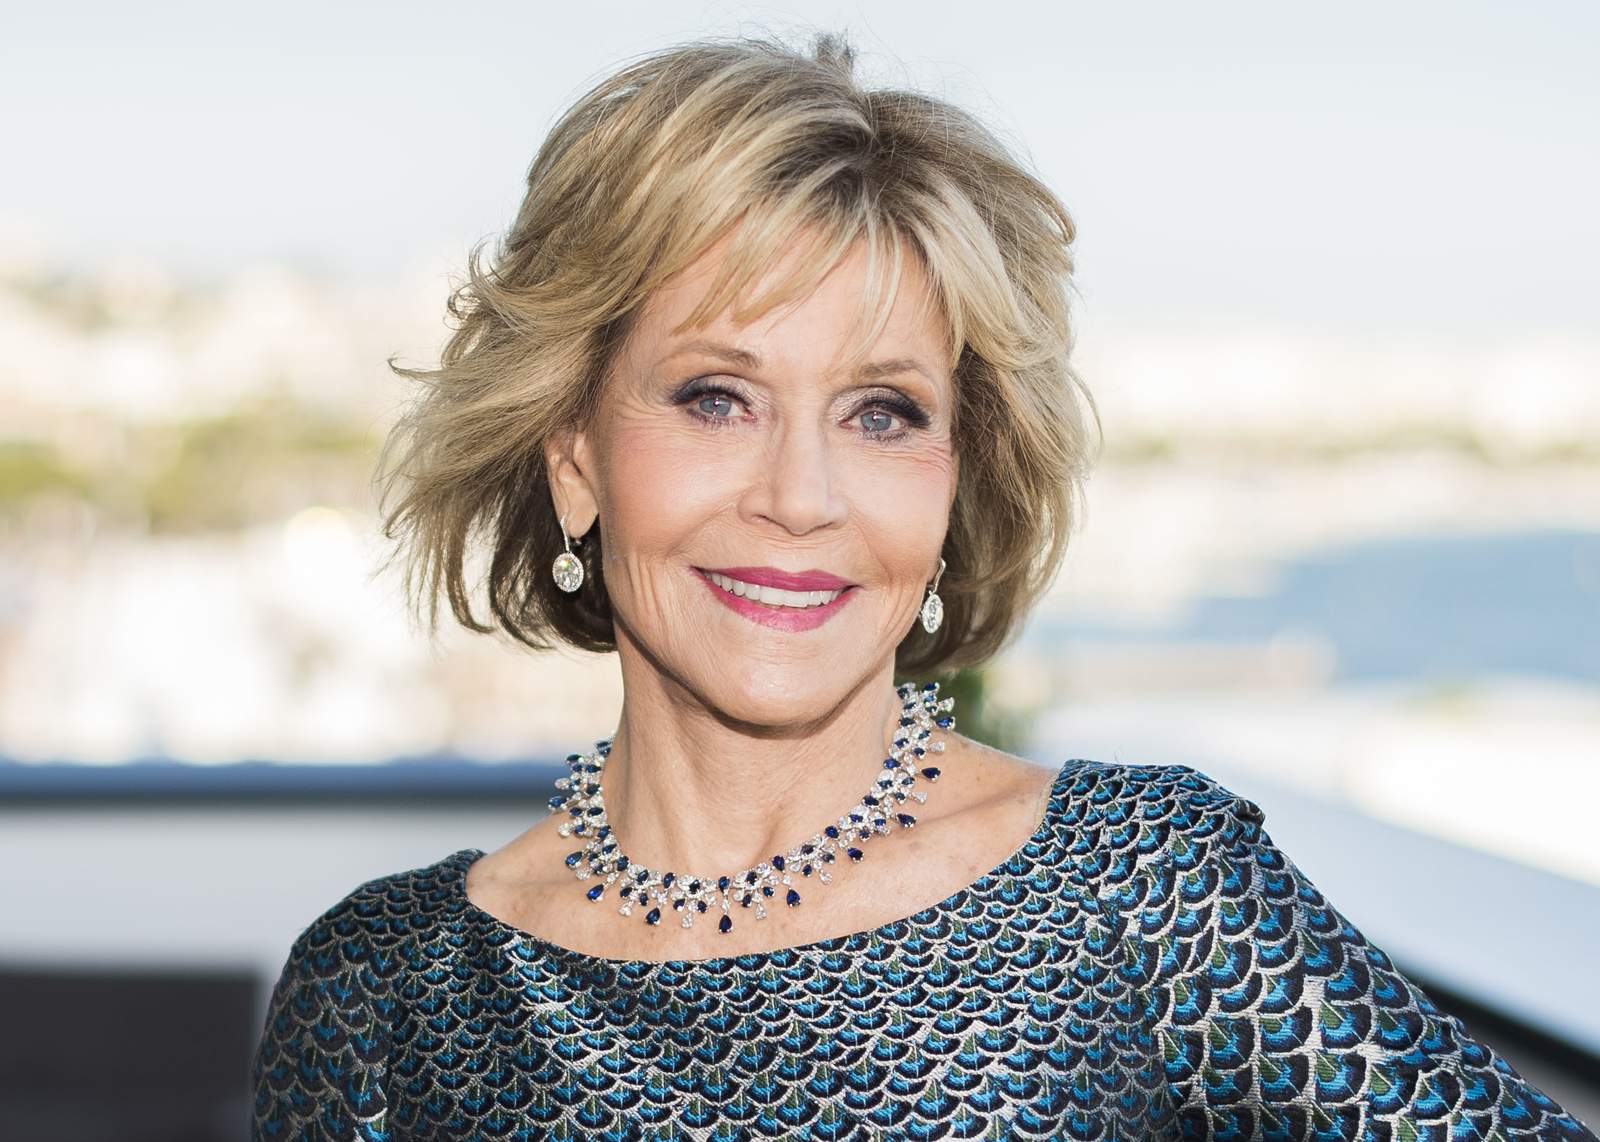 Jane Fonda to receive Golden Globes' Cecil B. DeMille Award - WPLG Local 10